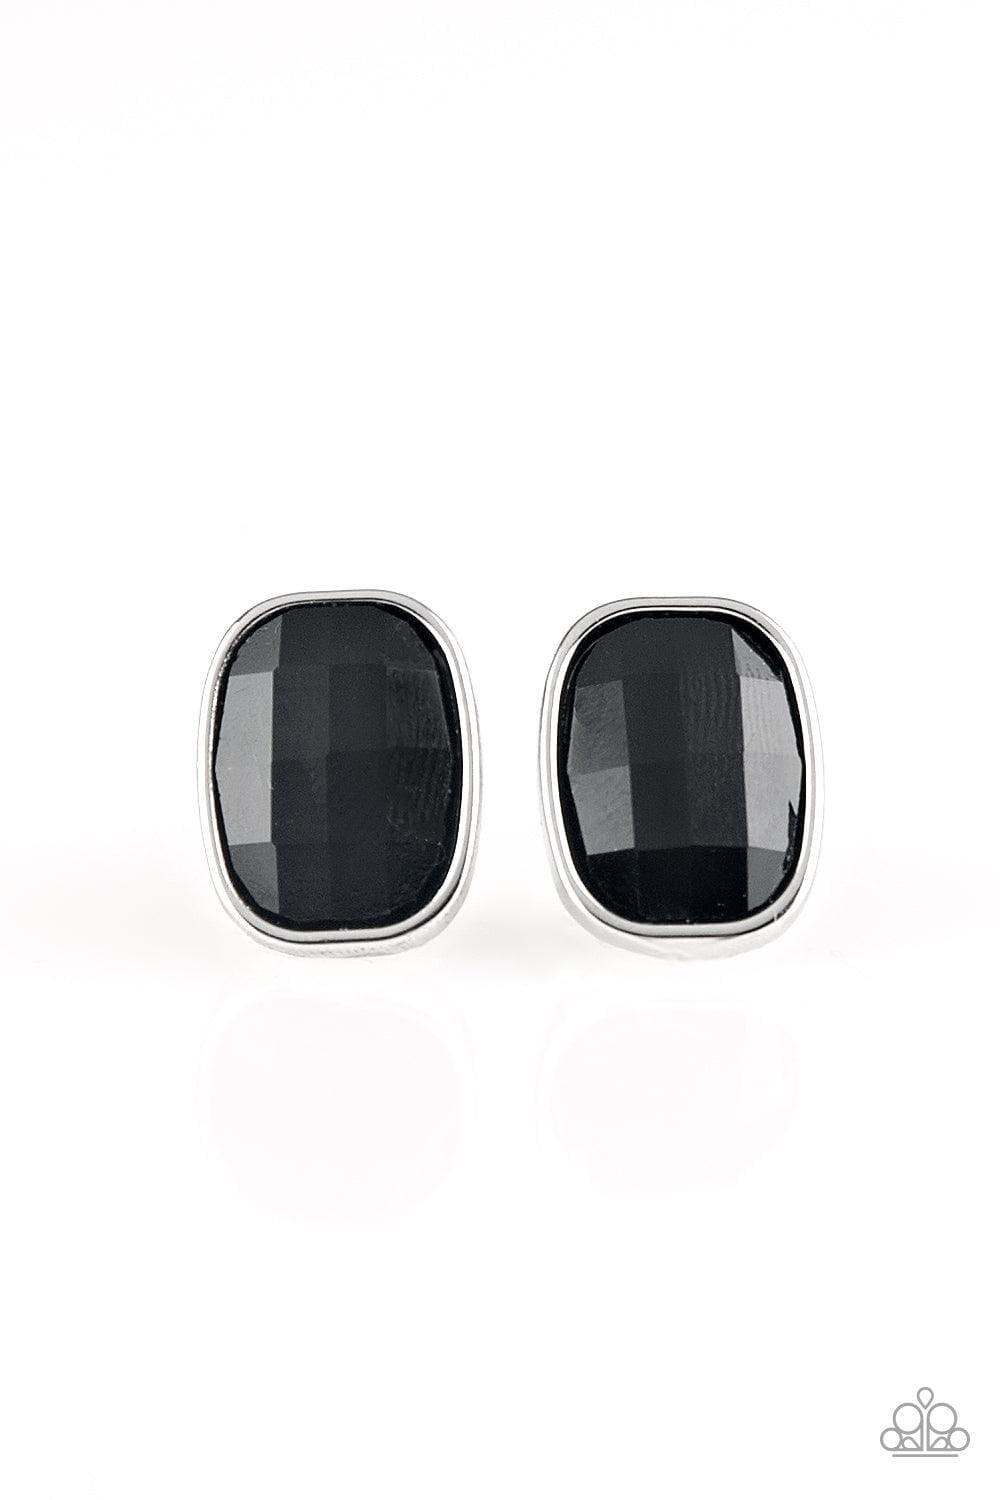 Paparazzi Accessories - Incredibly Iconic - Black Earrings - Bling by JessieK